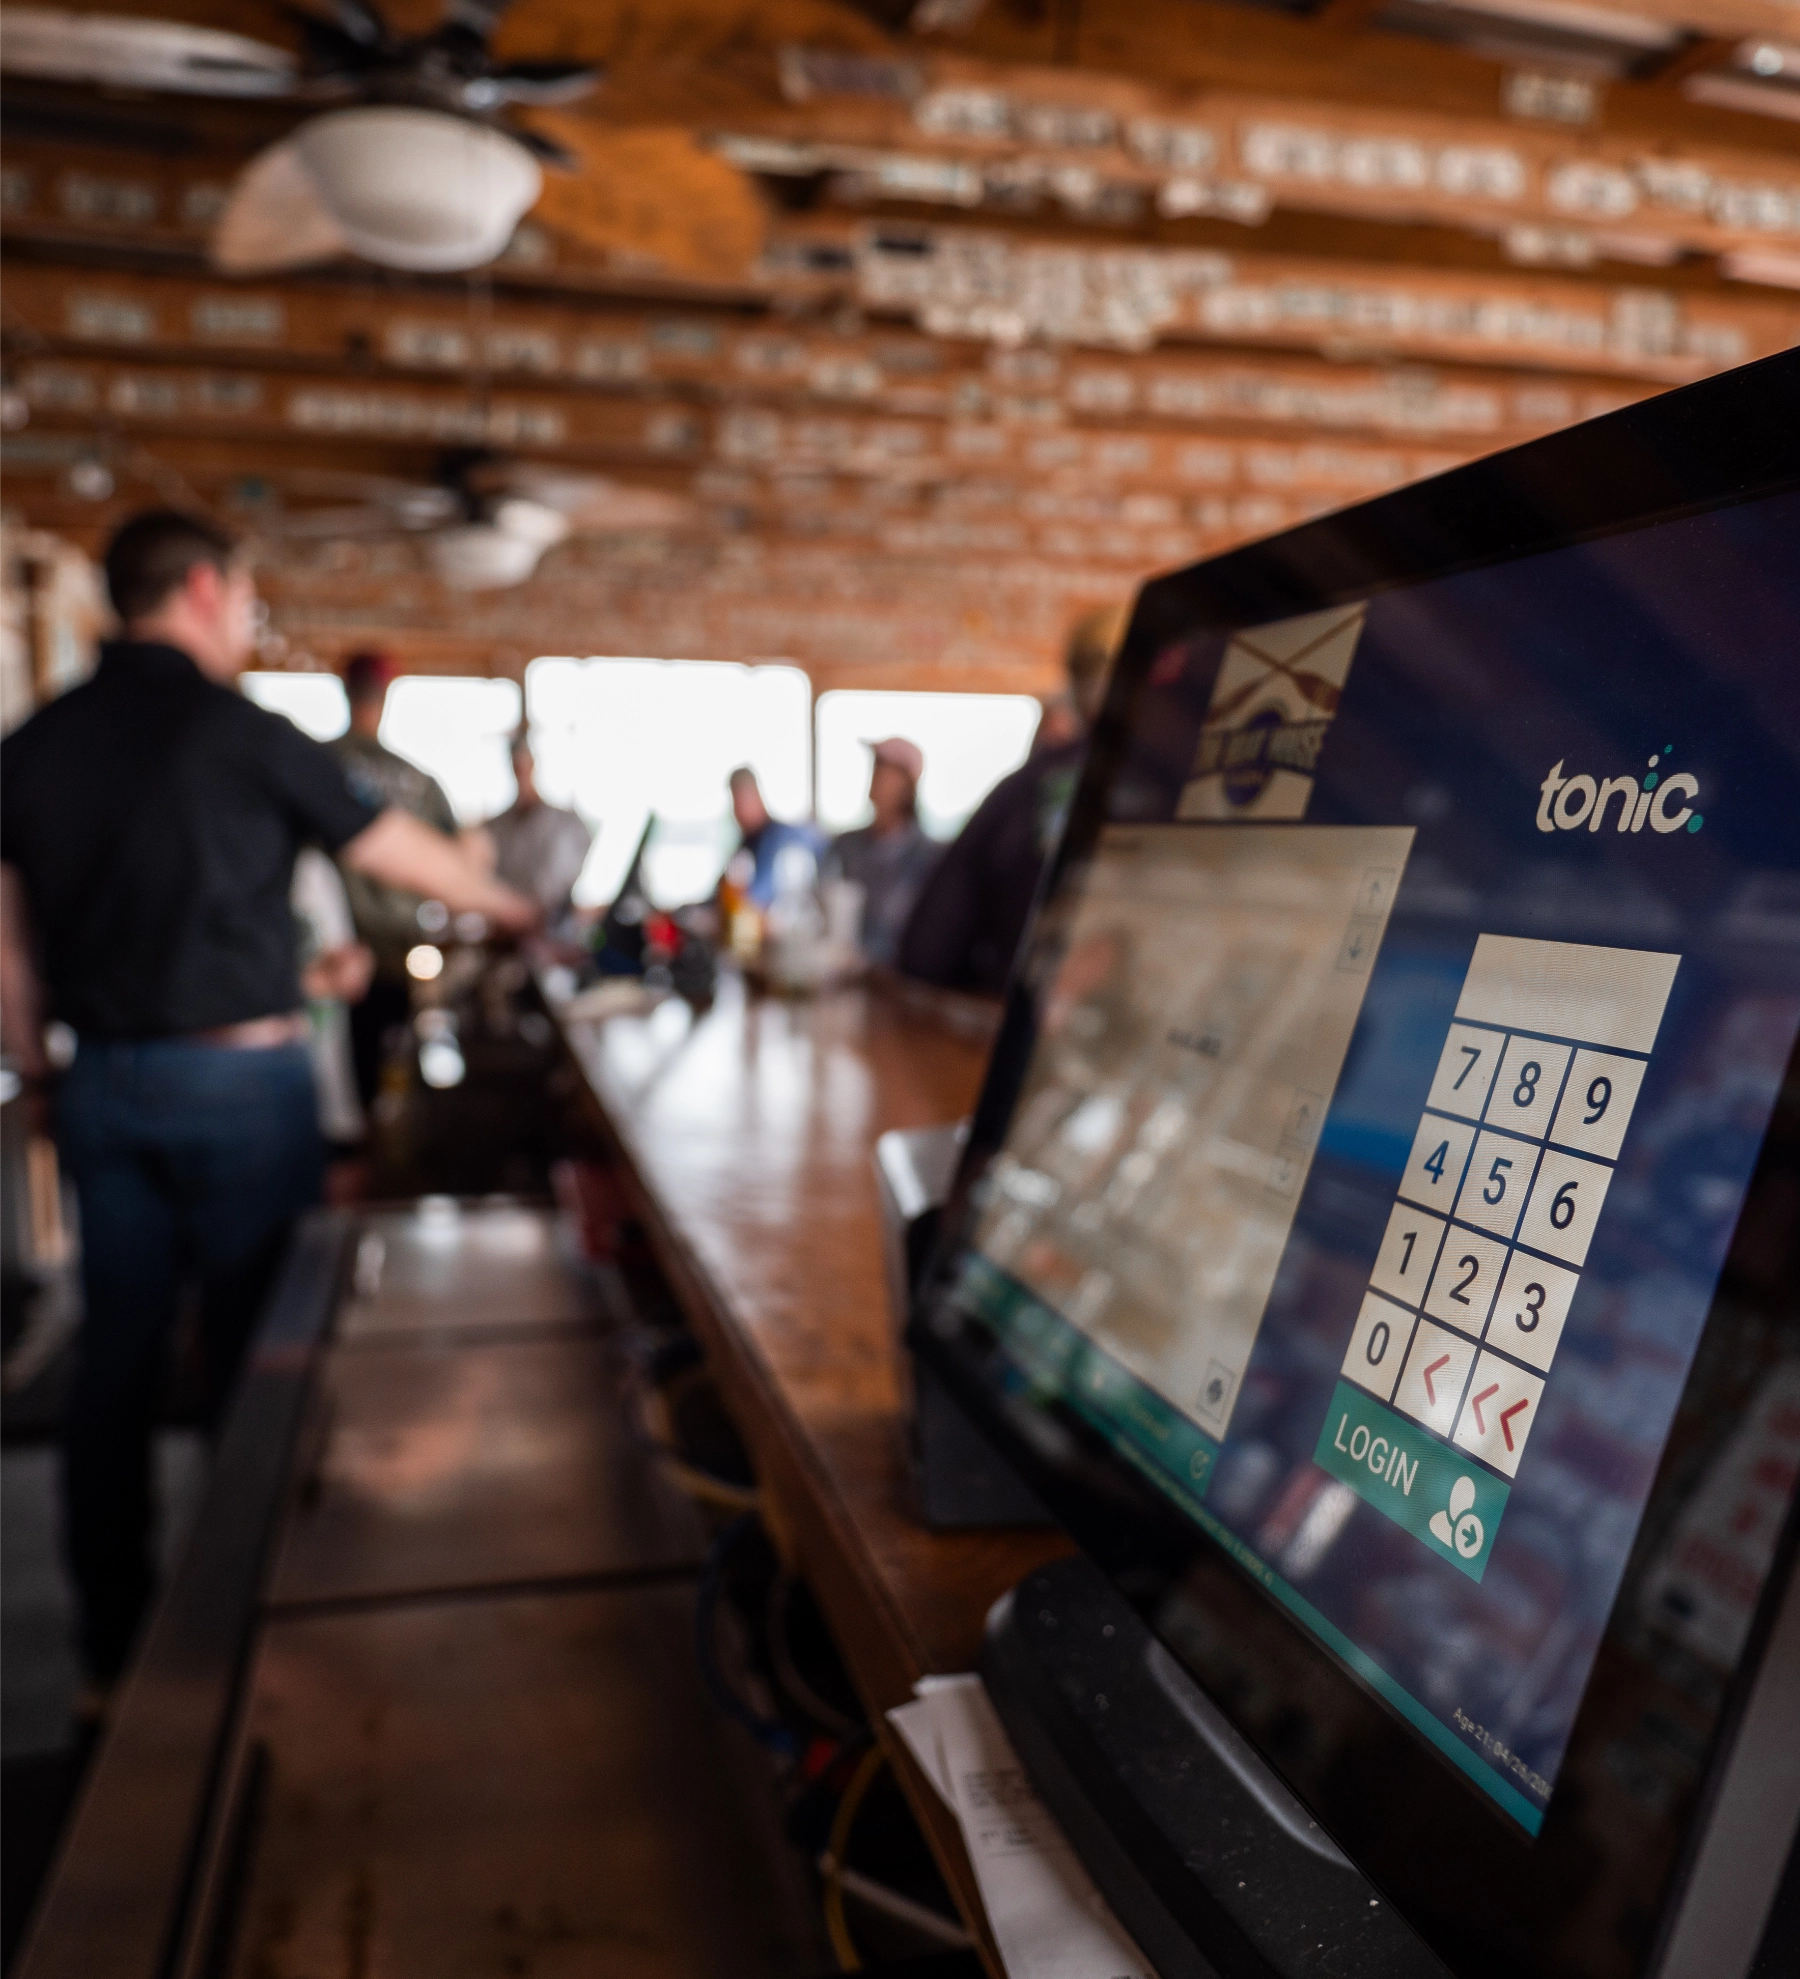 A Tonic POS countertop station sits on a restaurant bar counter, with blurred figures of a trainer and staff in the background.